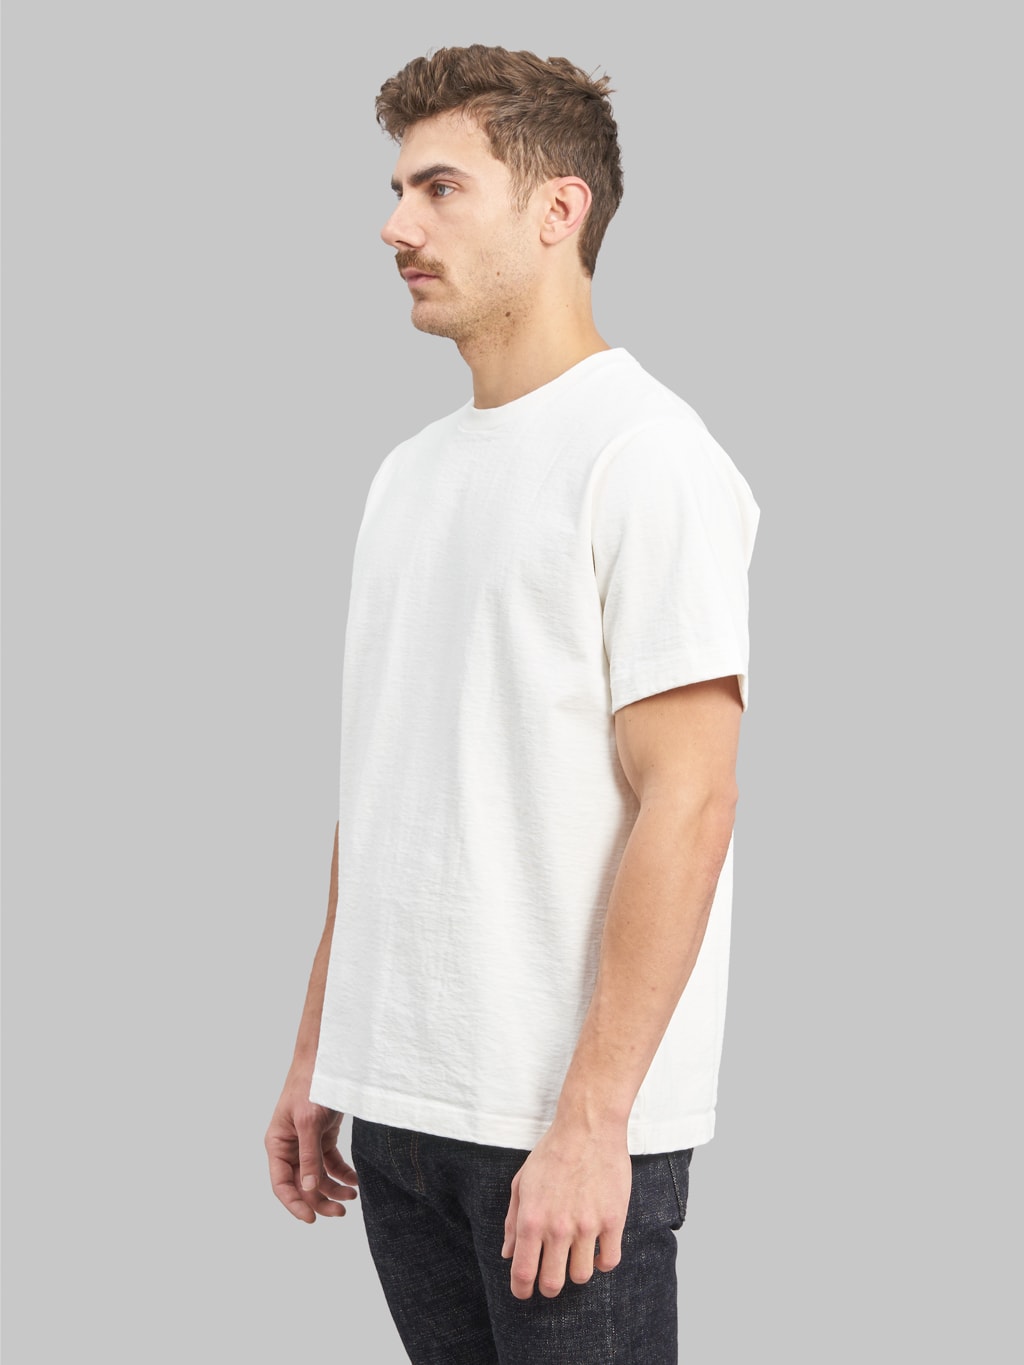 jackman dotsume tshirt off birch white  side fit